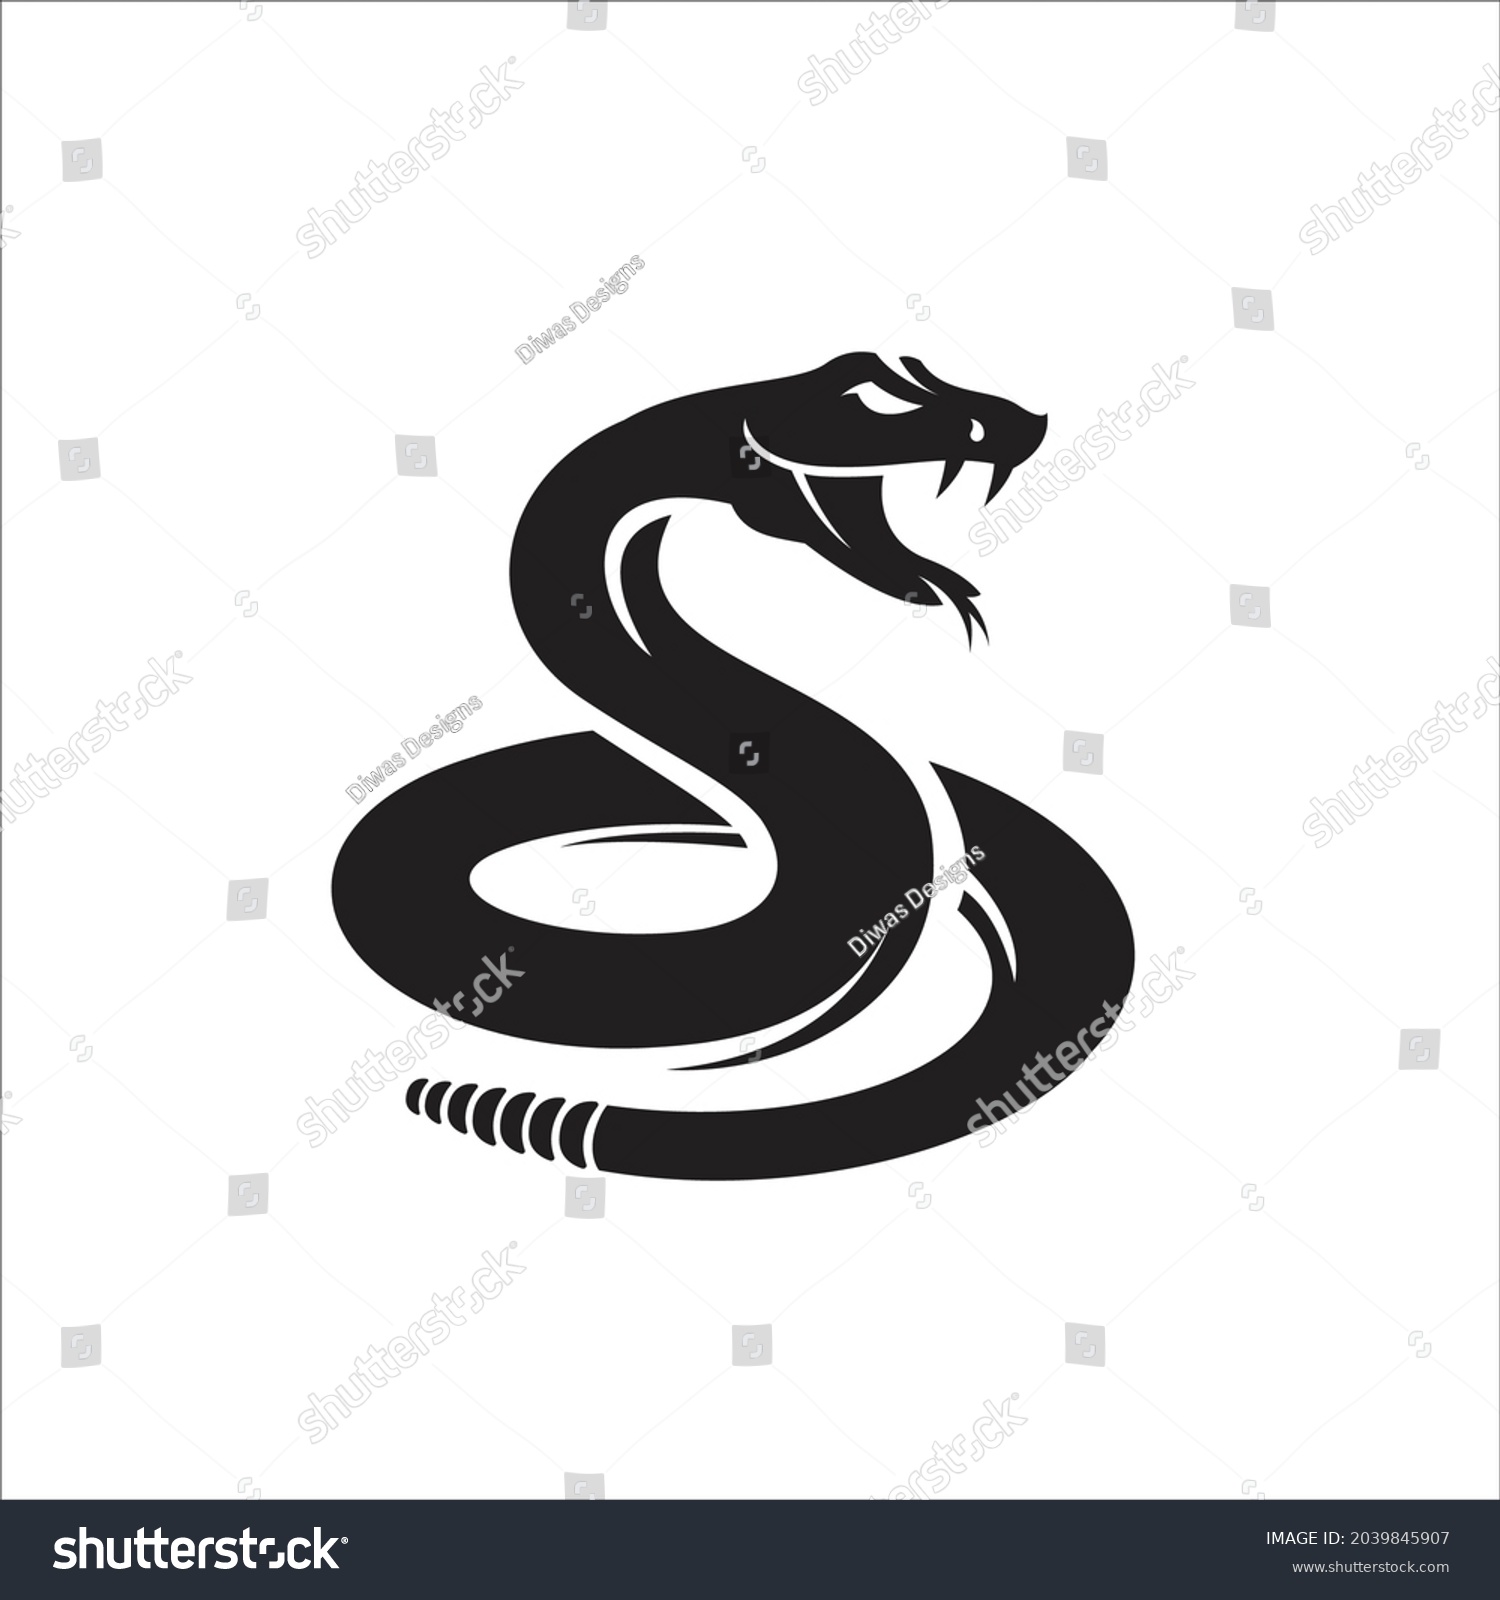 SVG of Isolated silhouette Rattlesnake logo icon vector svg